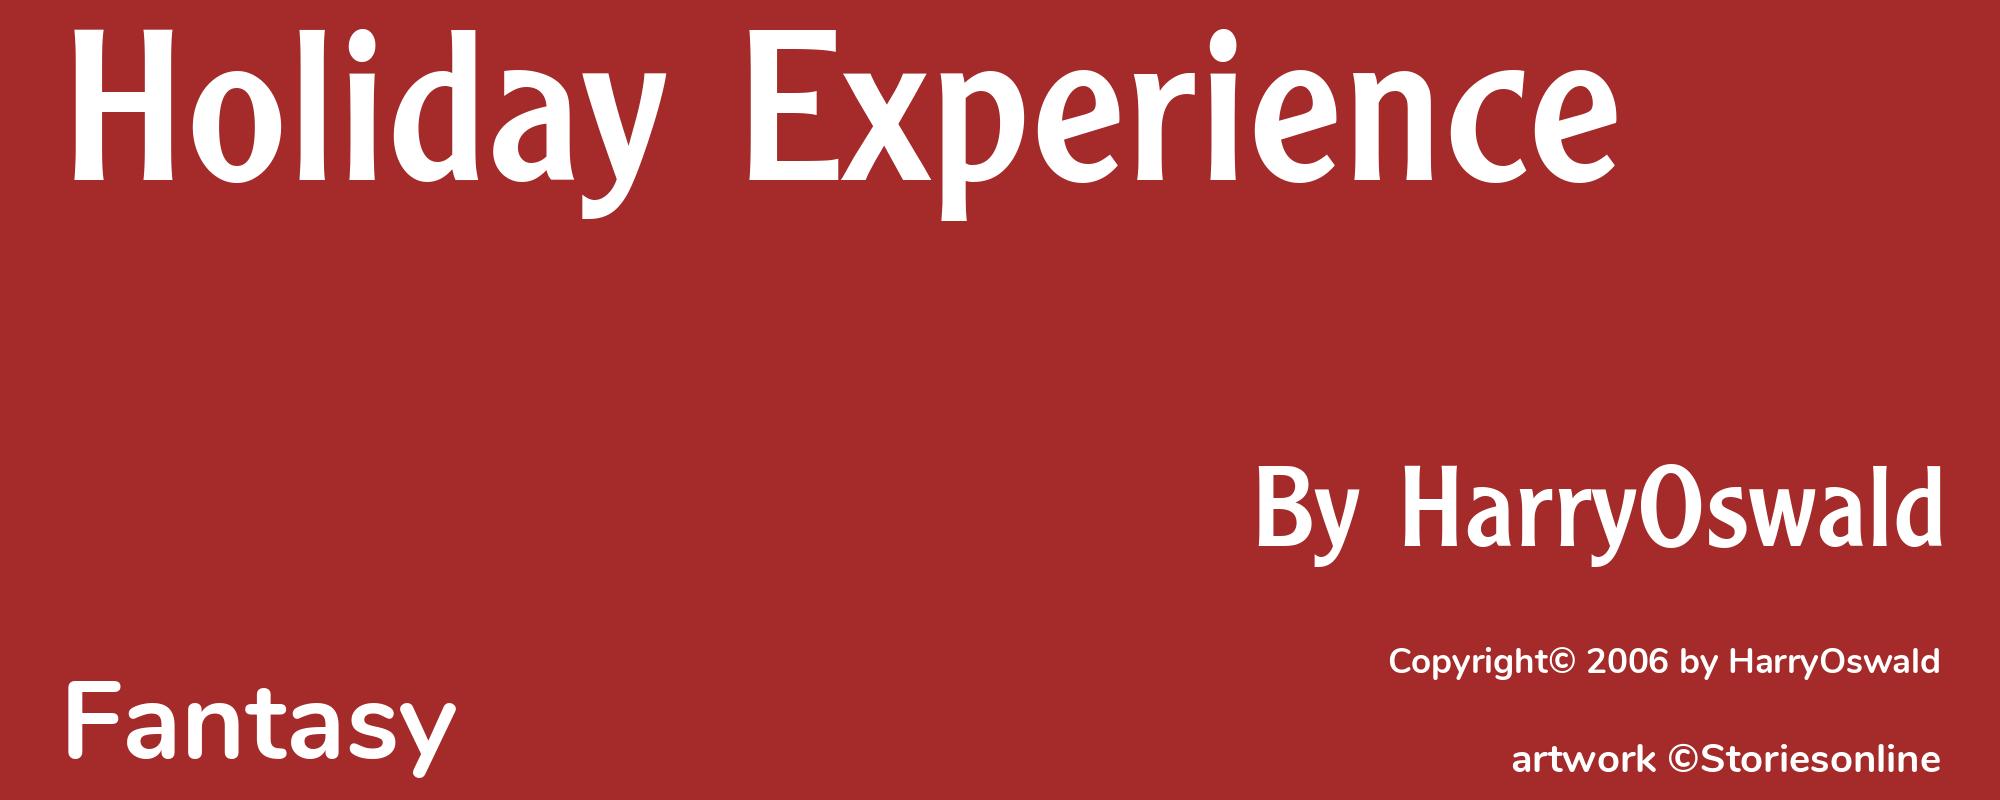 Holiday Experience - Cover